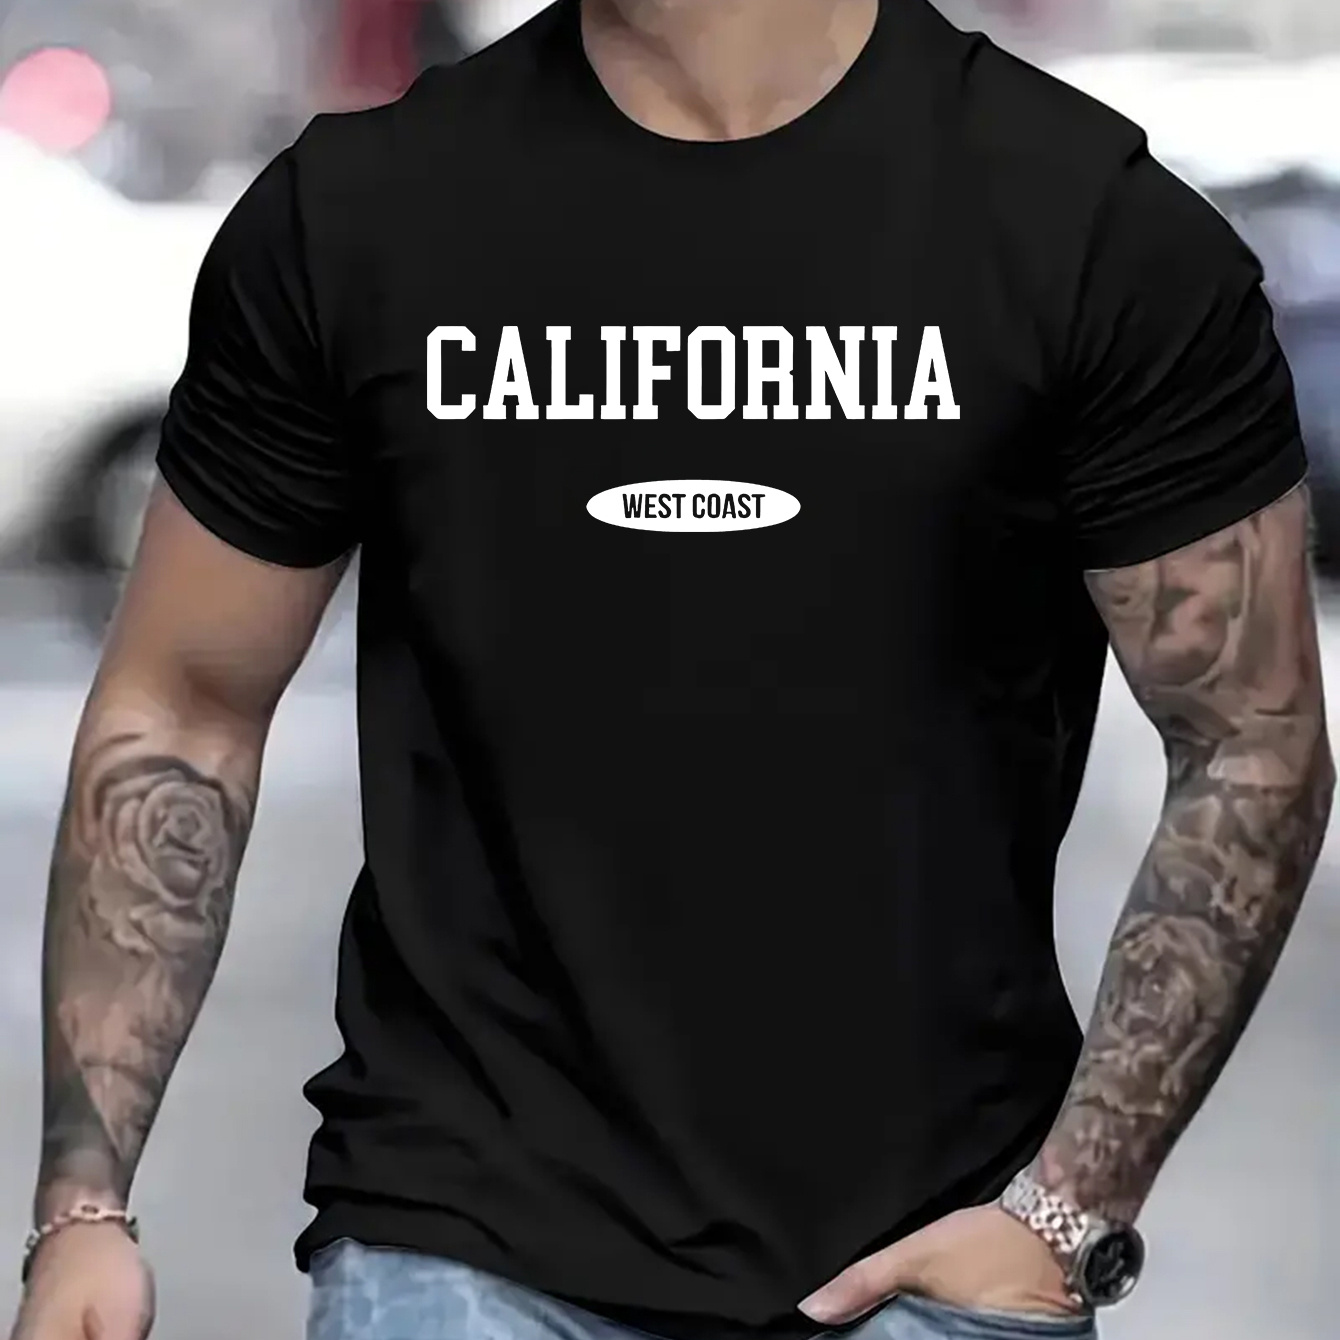 

California" Creative Print Casual Novelty T-shirt For Men, Short Sleeve Summer& Spring Top, Comfort Fit, Stylish Streetwear Crew Neck Tee For Daily Wear